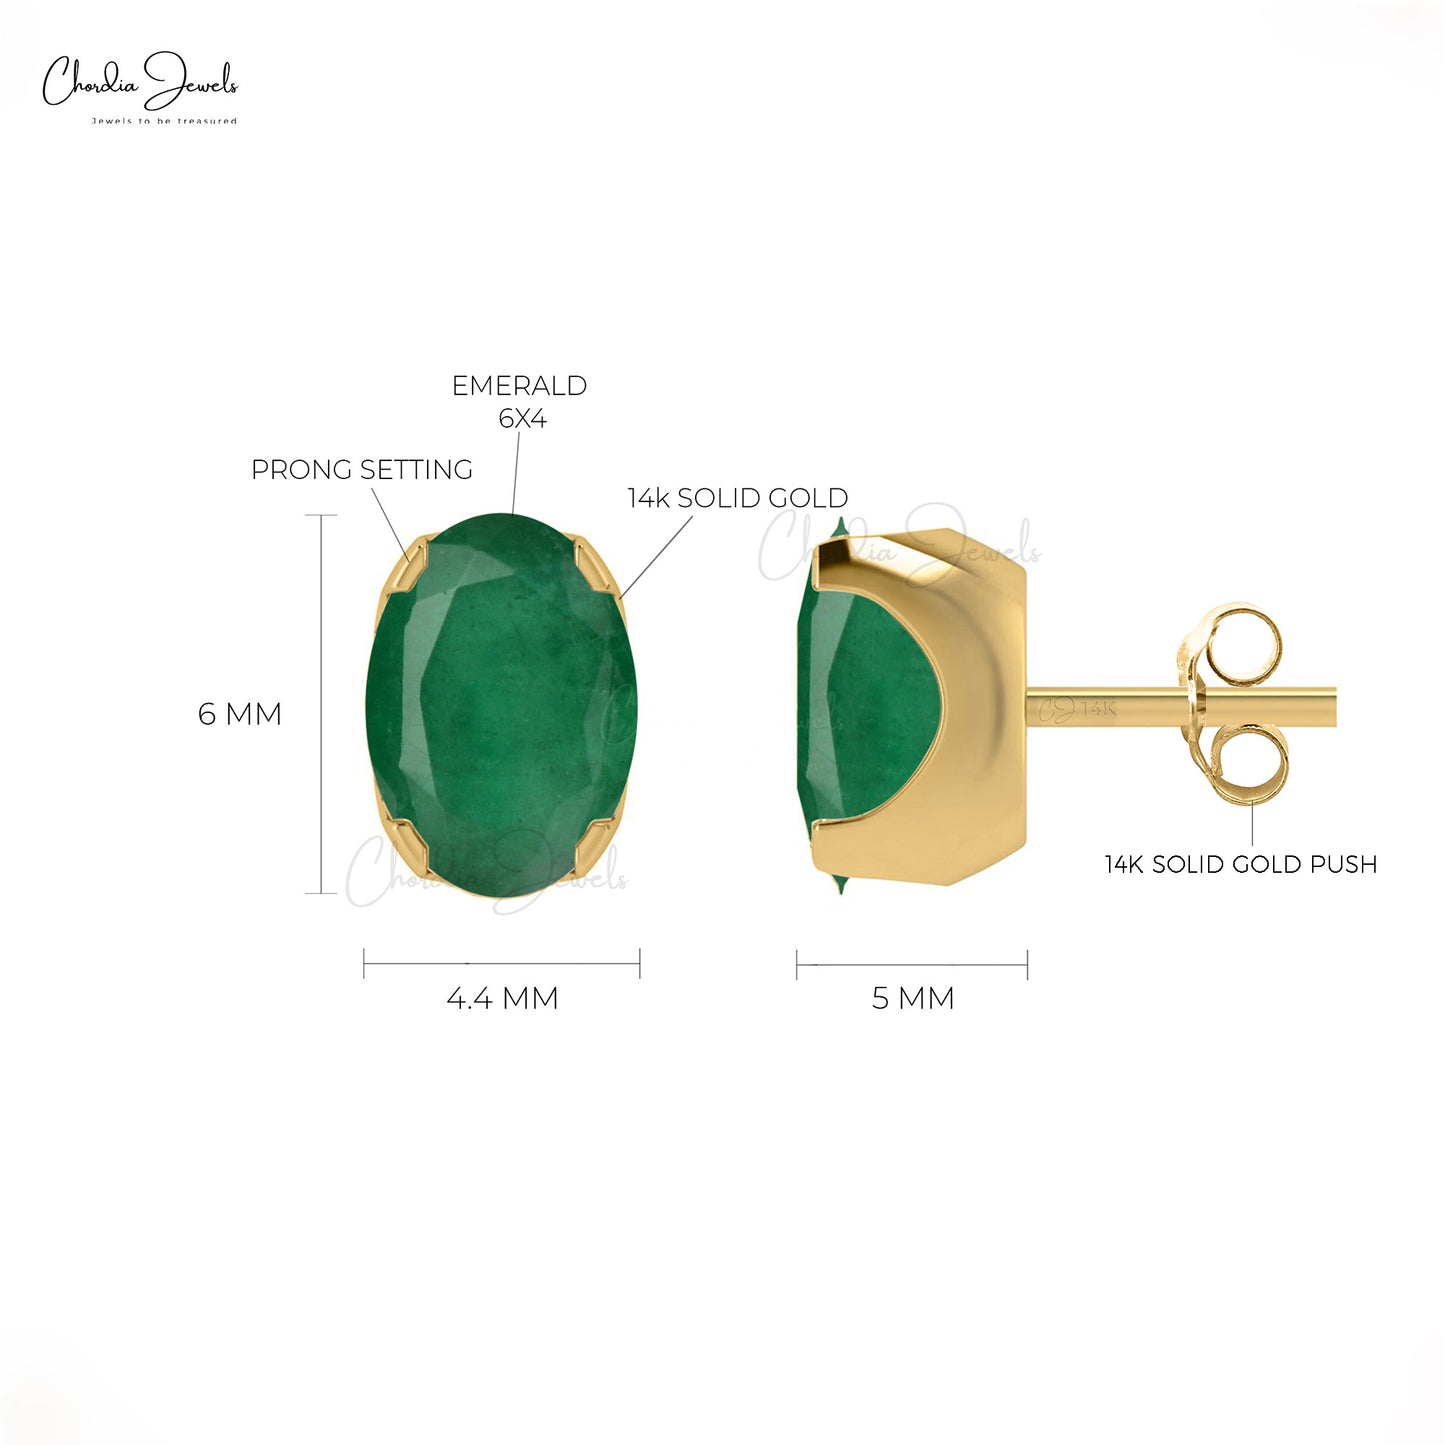 Adorn yourself with our real emerald earrings.